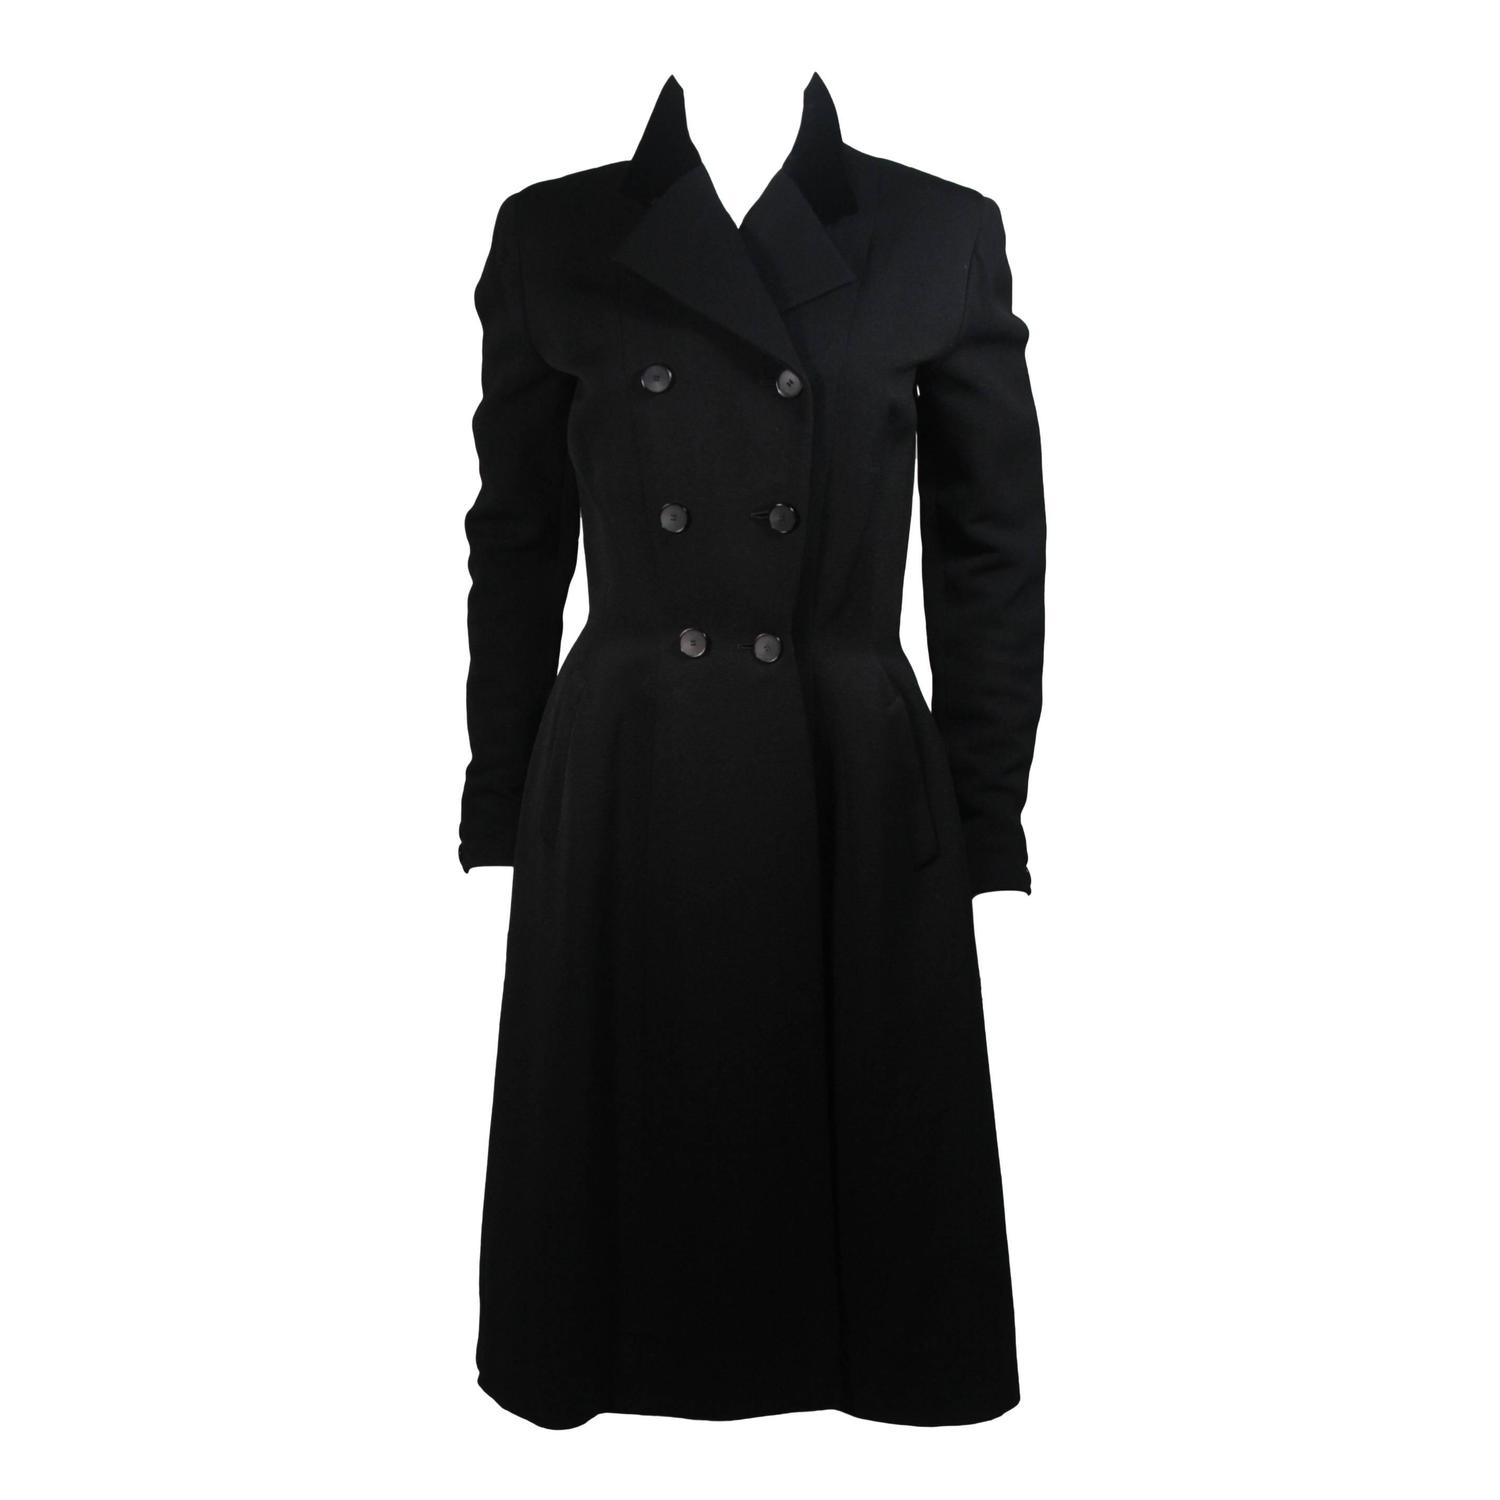 Hardy Amies Black Wool Coat with Velvet Trim Size Small at 1stdibs